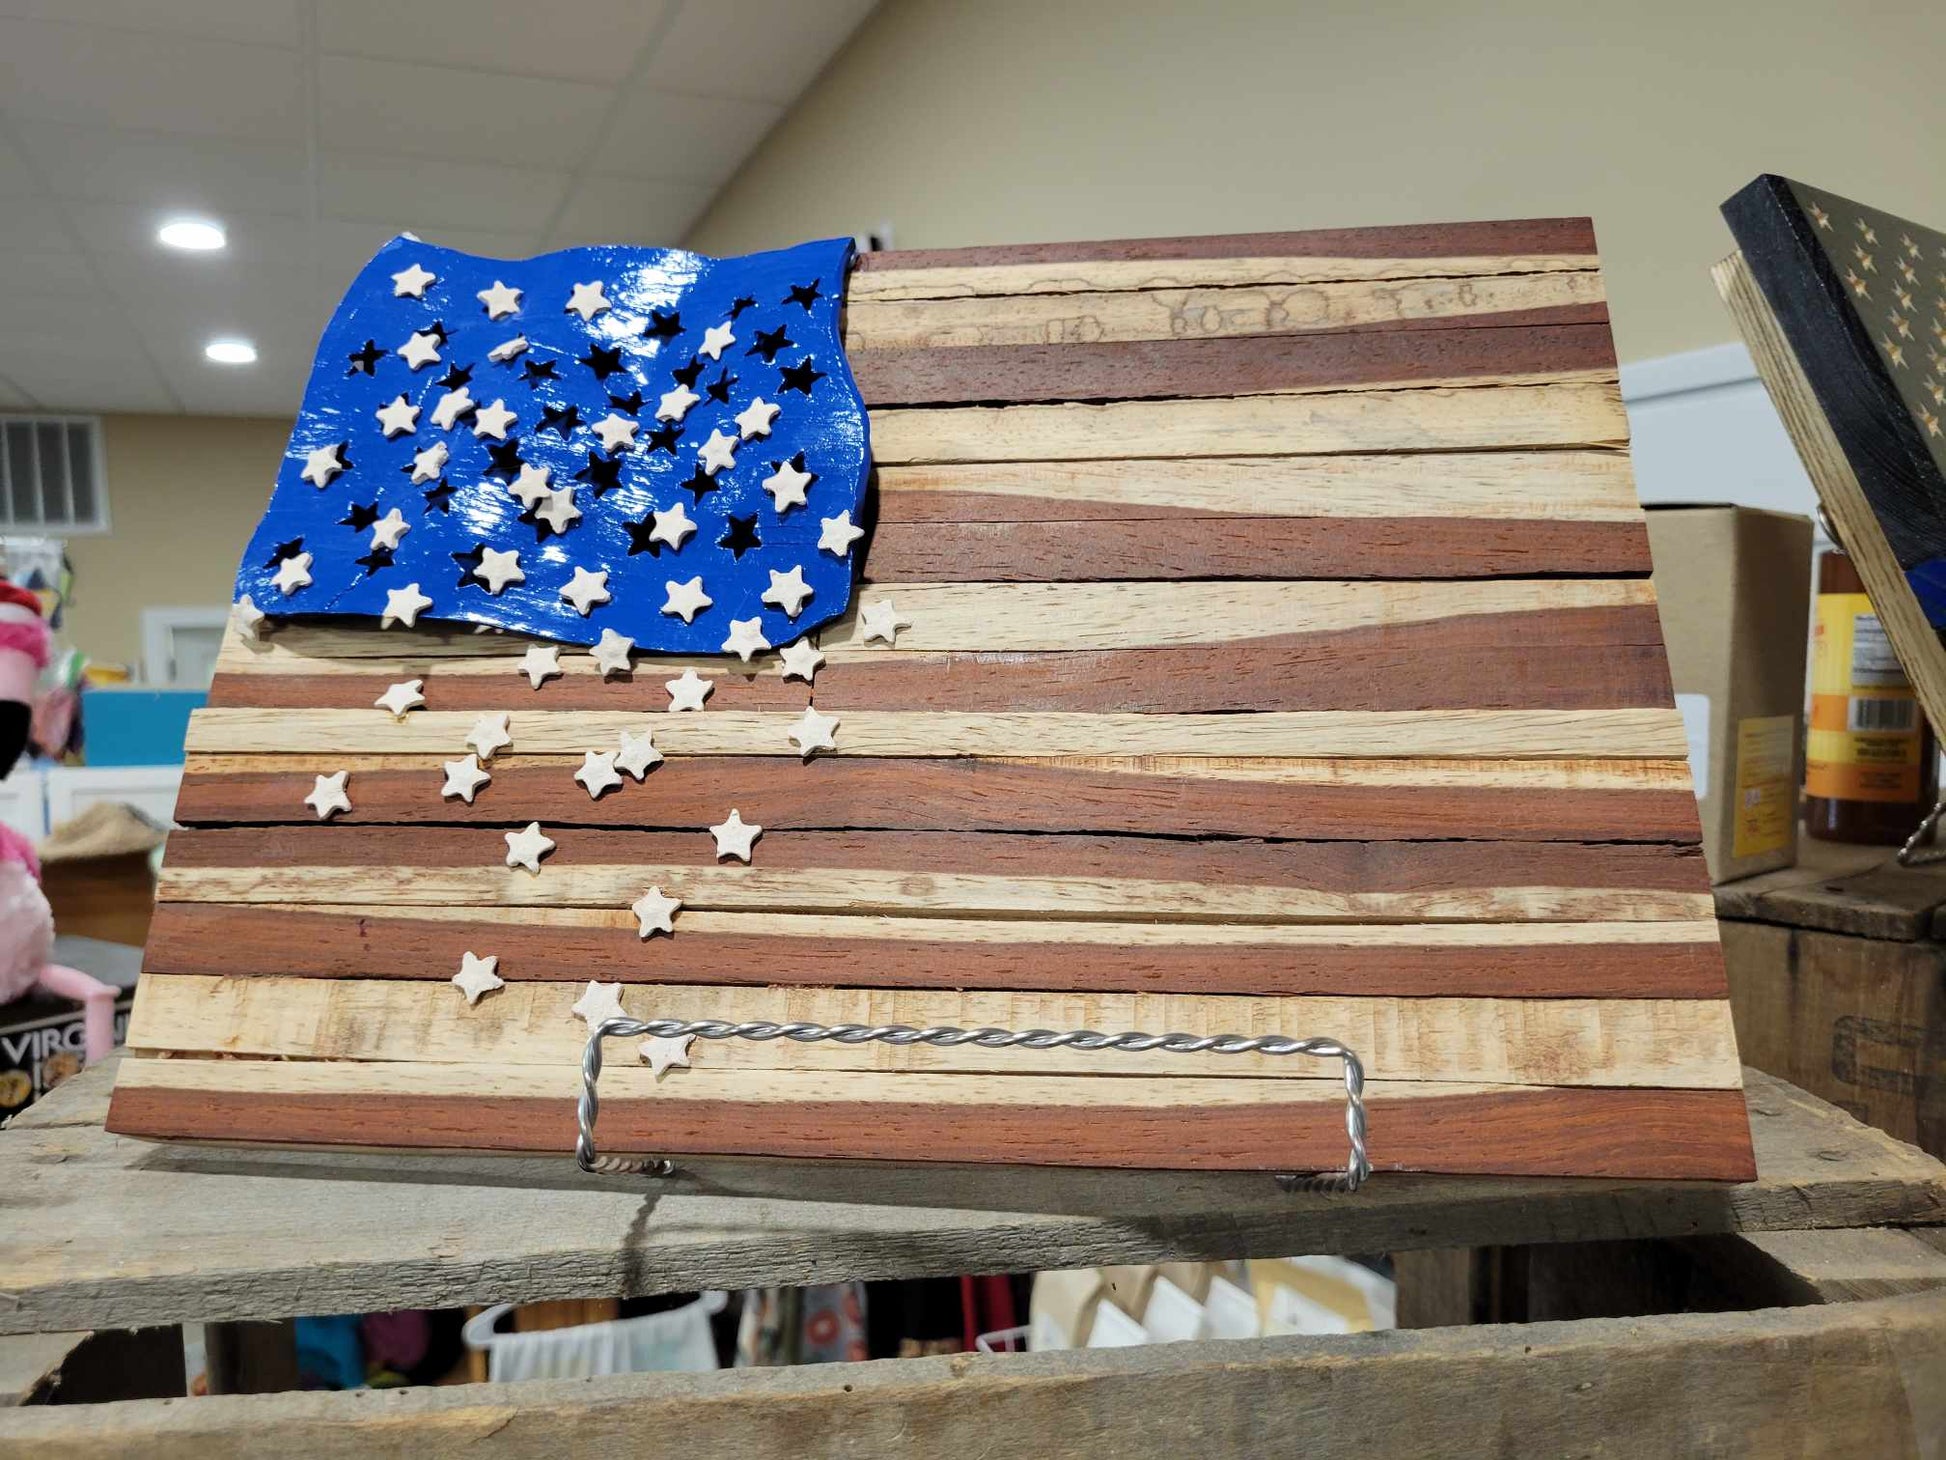 Fallen Stars of Service Wooden Flag - Dusty's Country Store